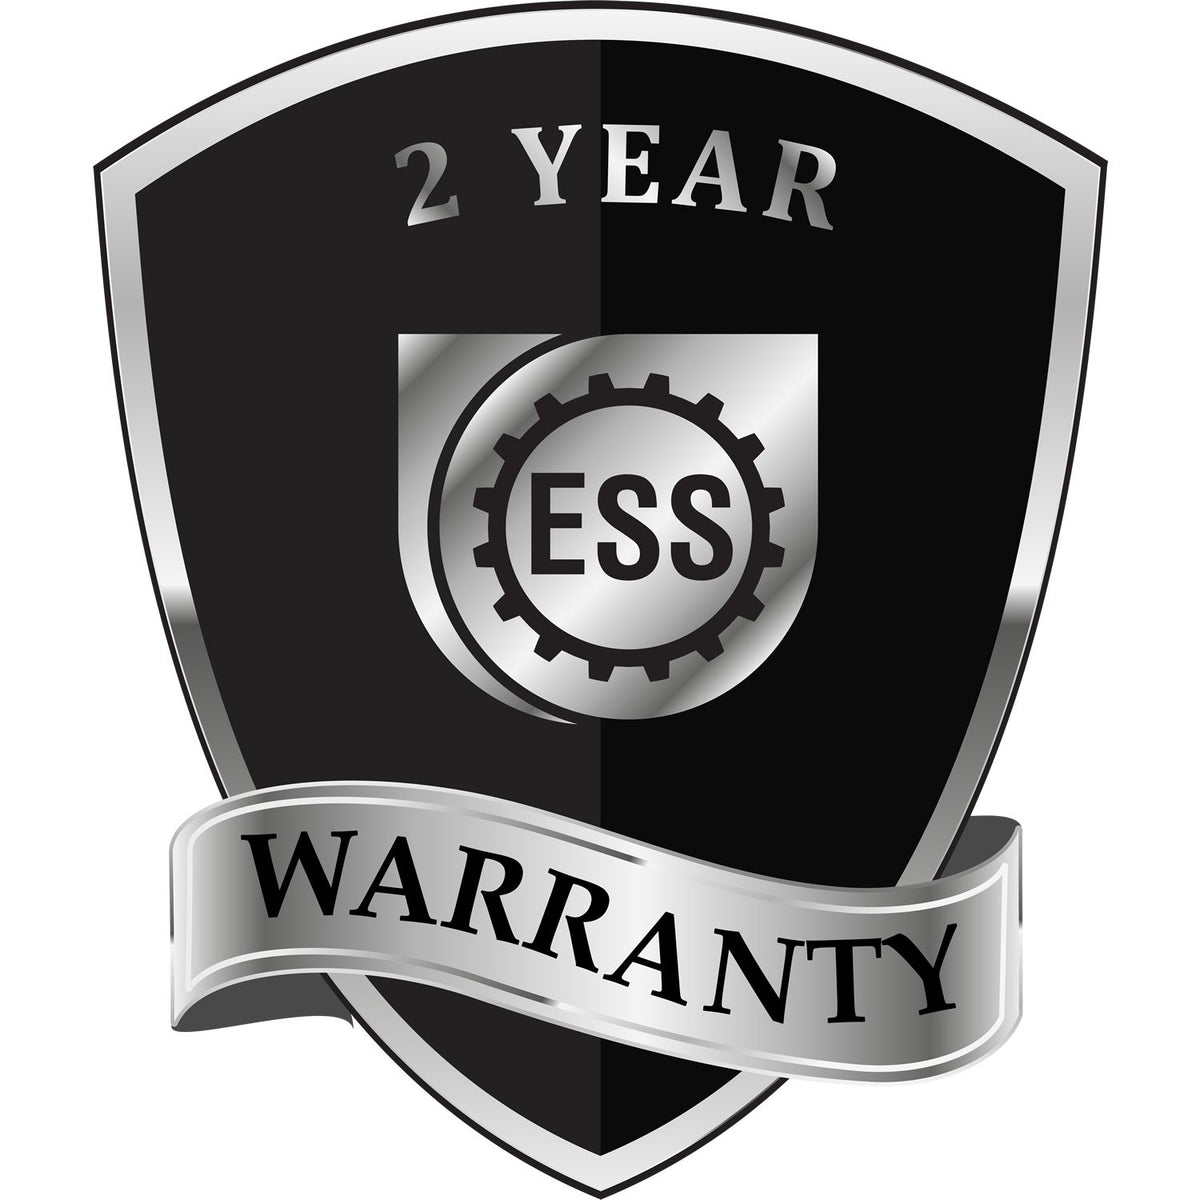 A badge or emblem showing a warranty icon for the Soft Maine Professional Engineer Seal